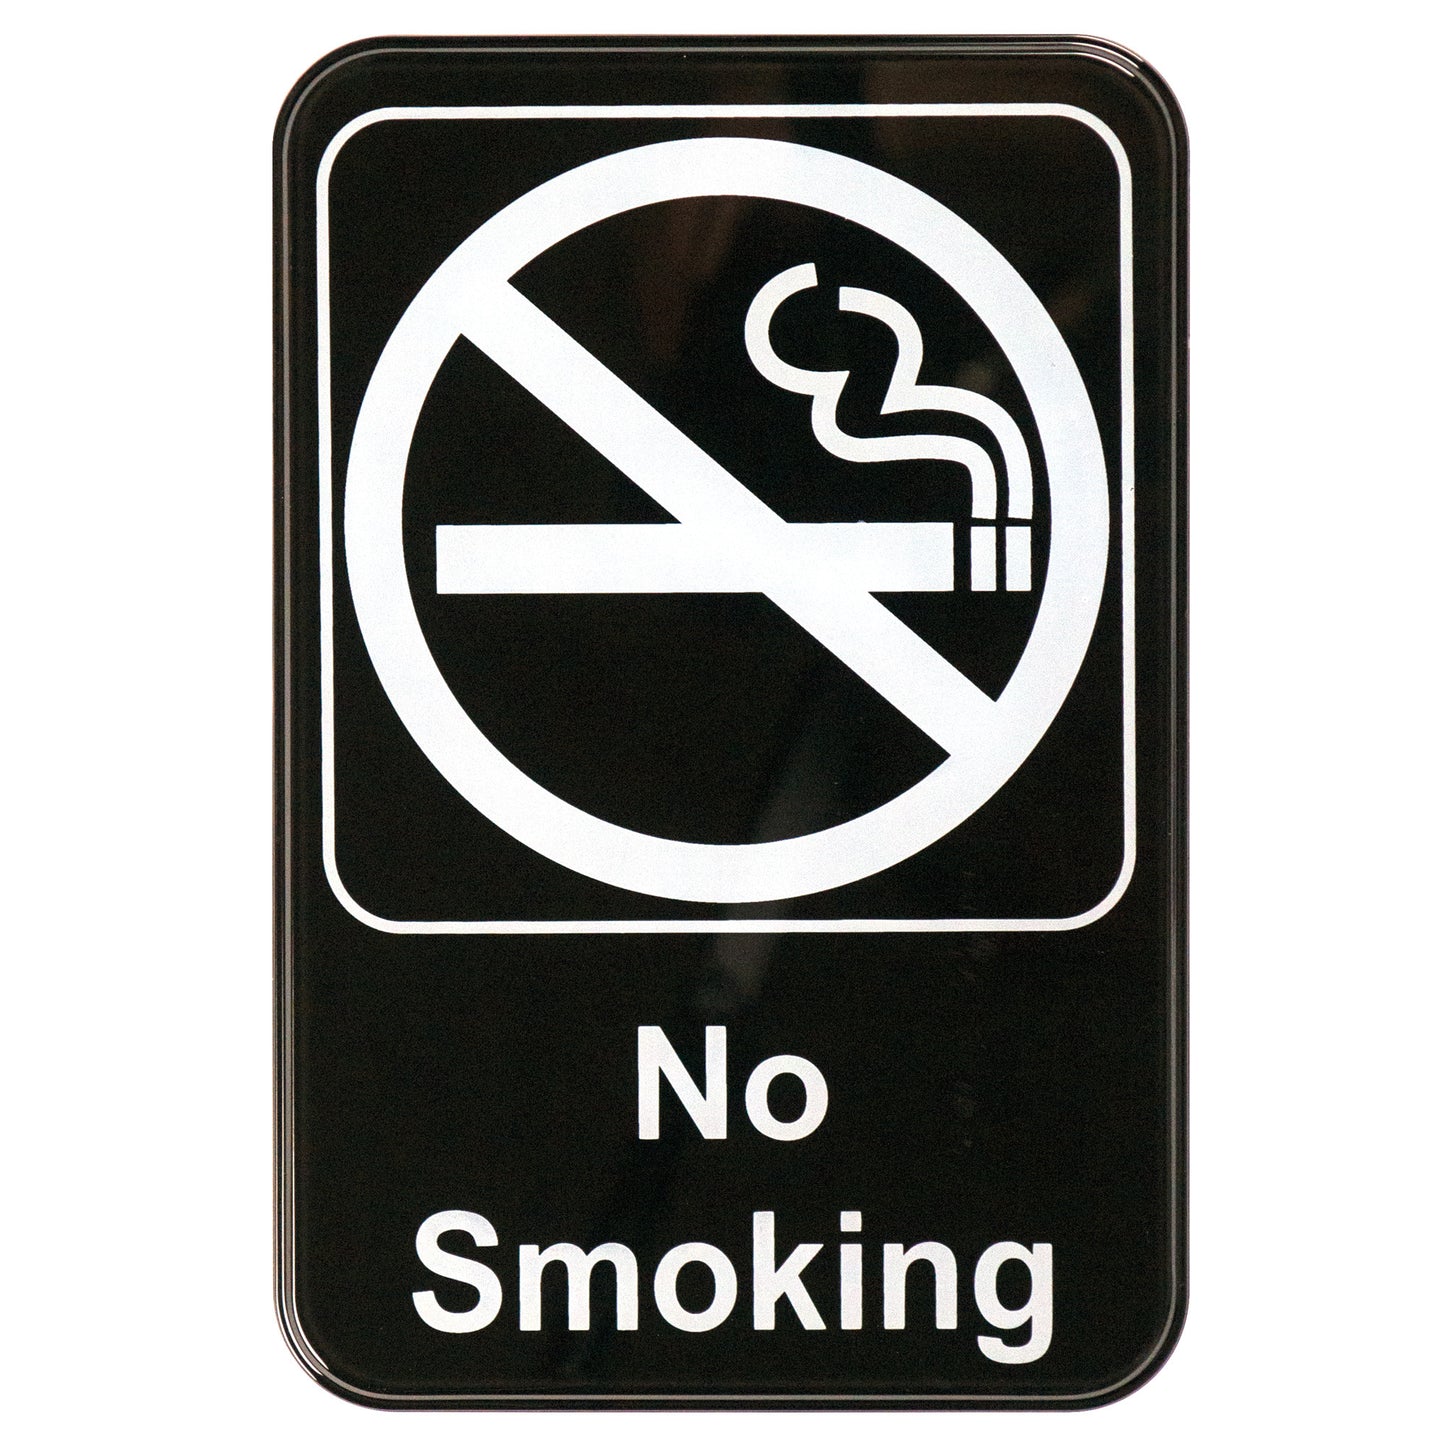 SGN-601 - Information Sign, 6"W x 9"H - No Smoking